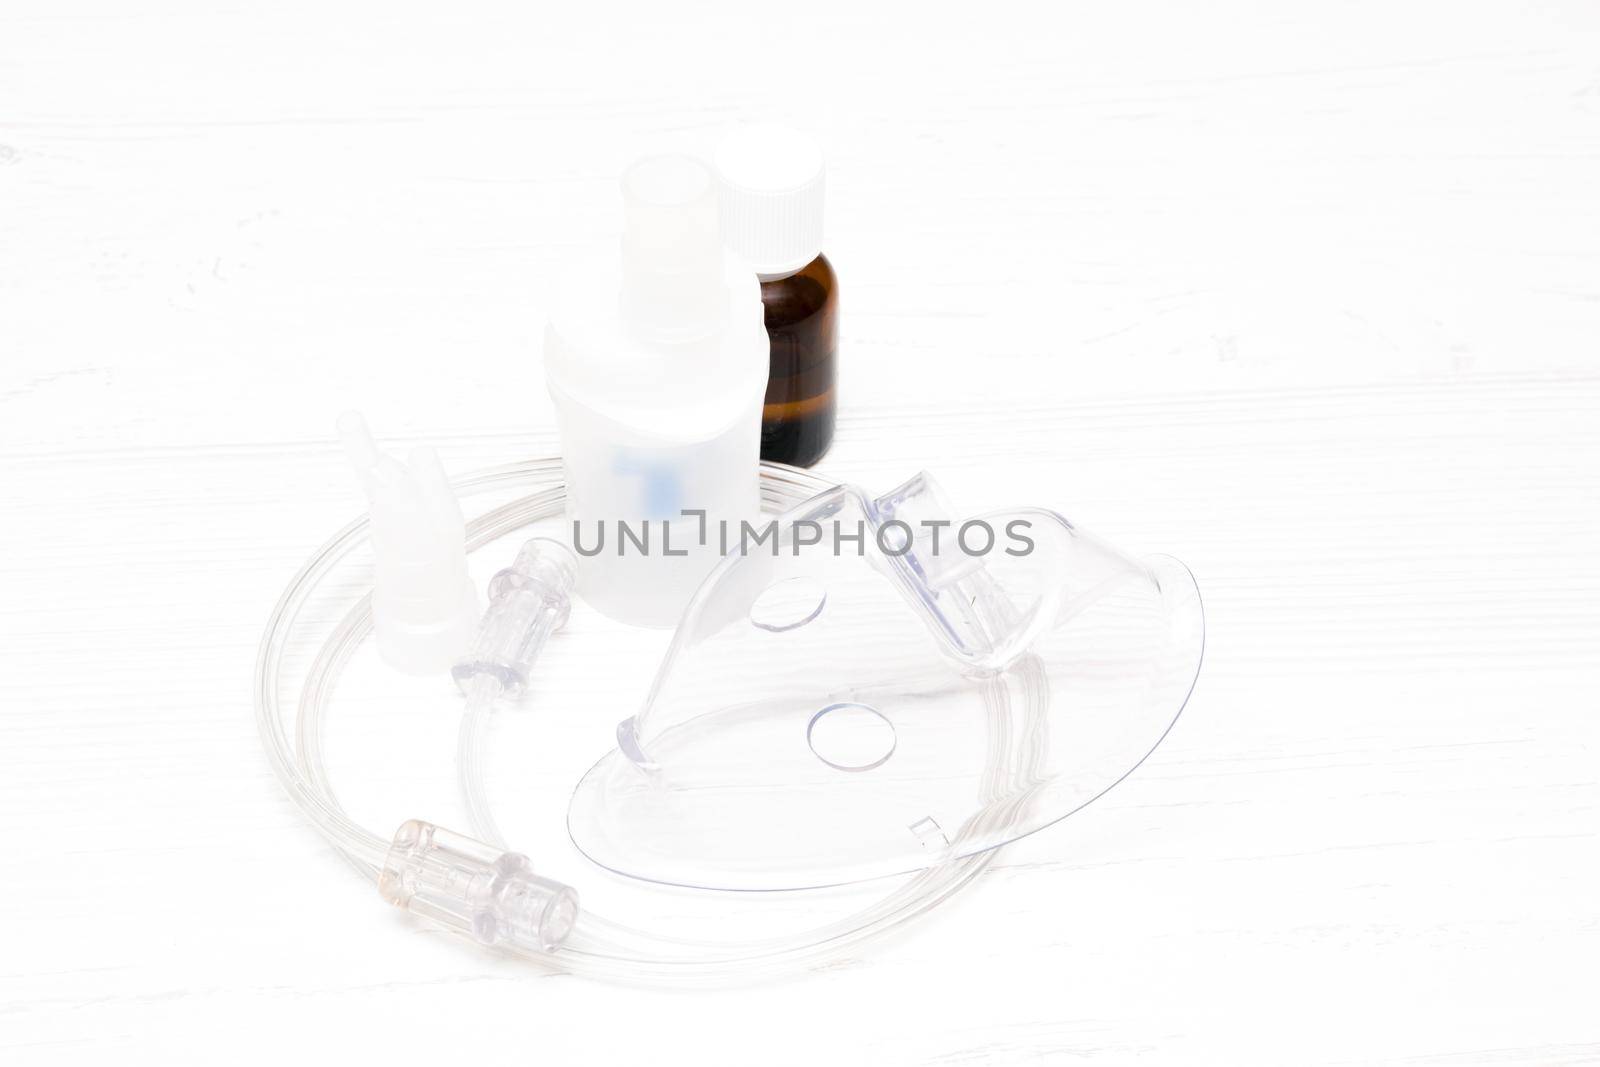 nhaler, tube and mask on a light background, copy space, medicine in a dark bottle for inhalation, respiratory diseases concept